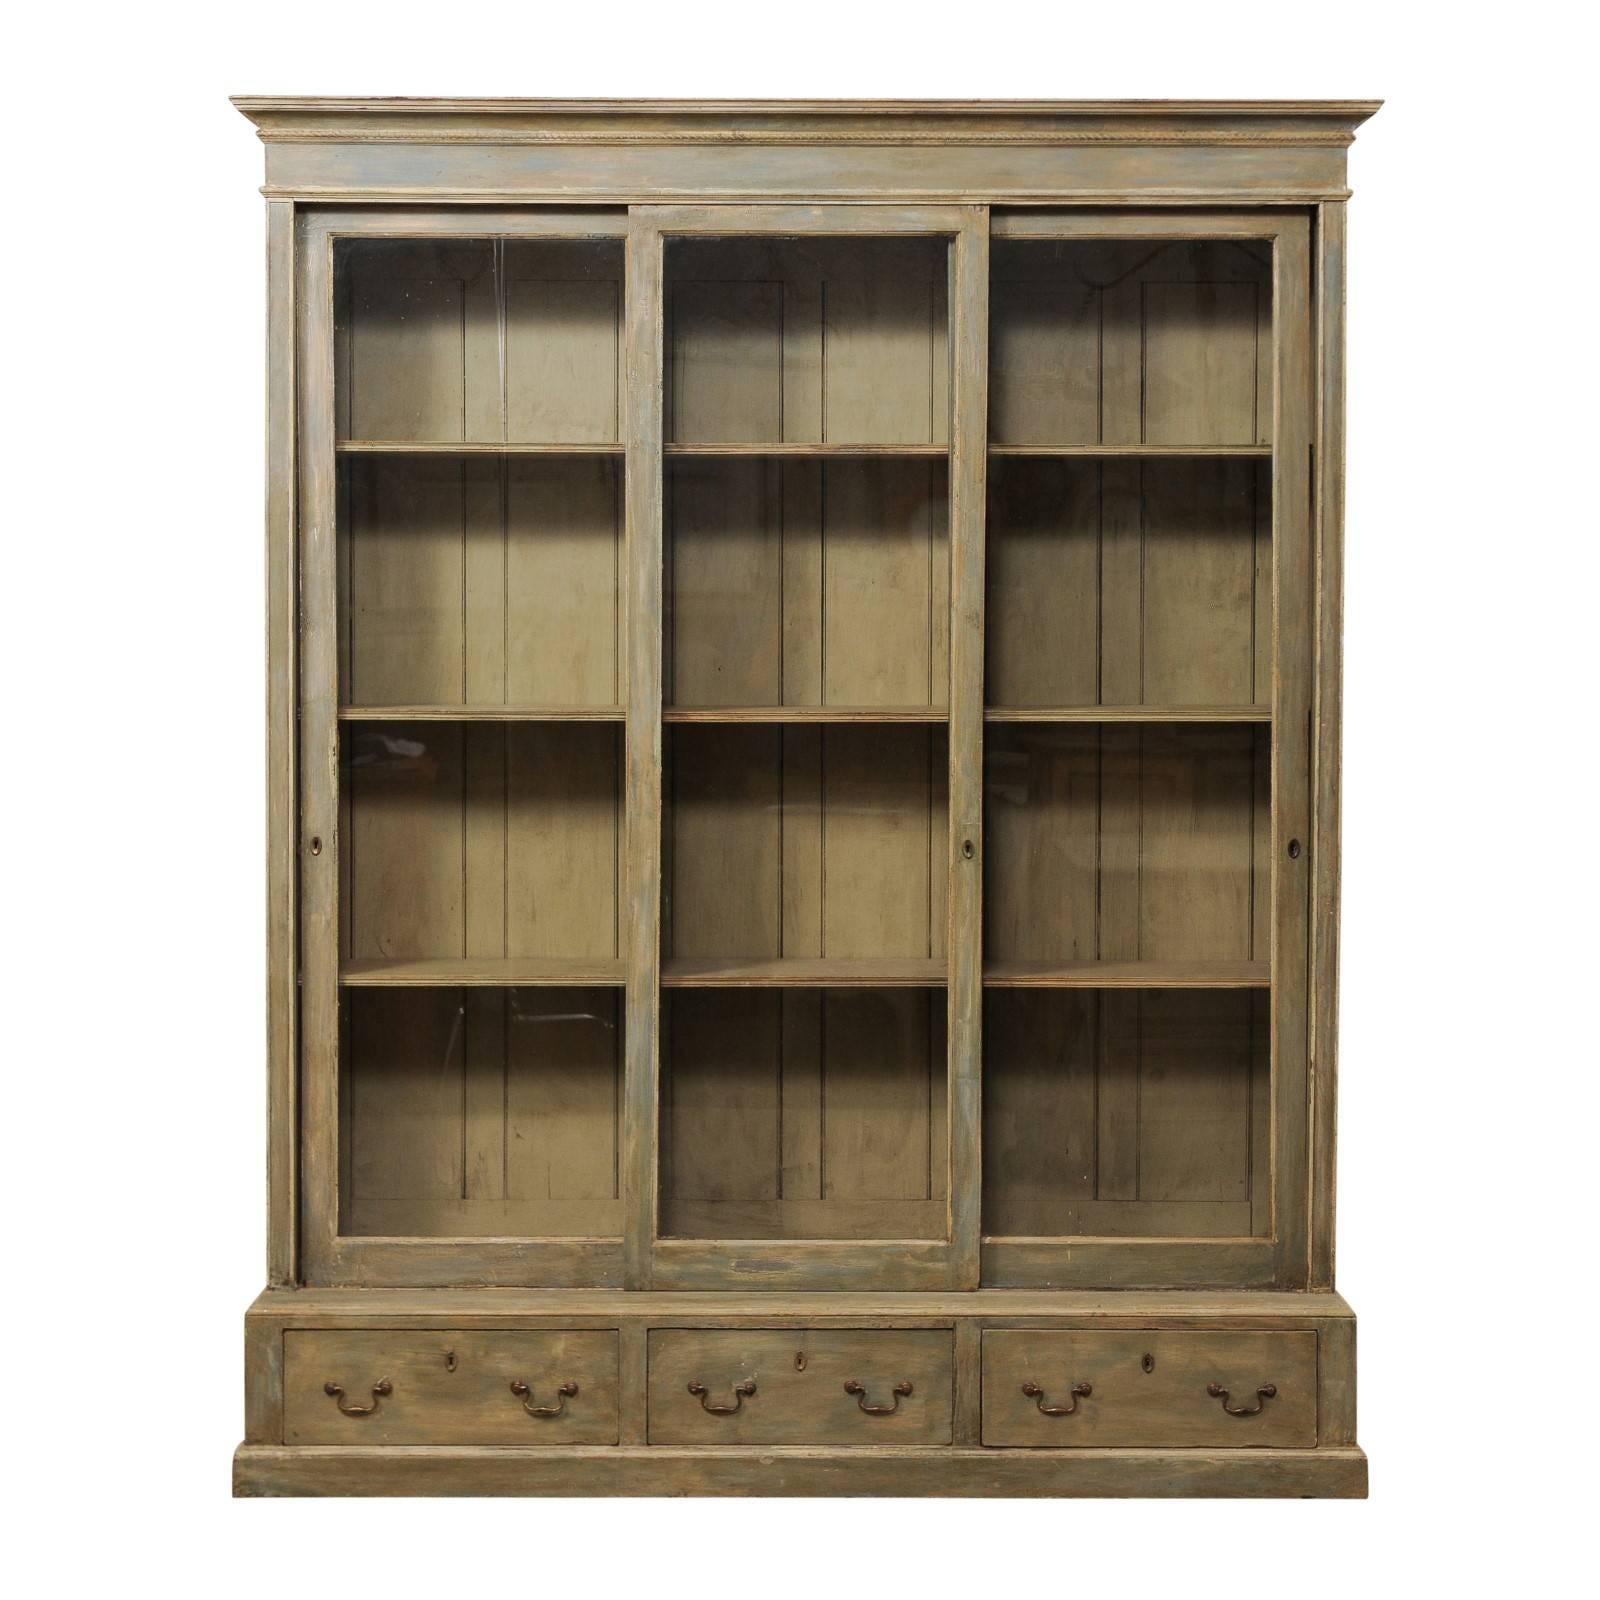 French 19th Century Large Painted Wood Bookcase with Sliding Doors